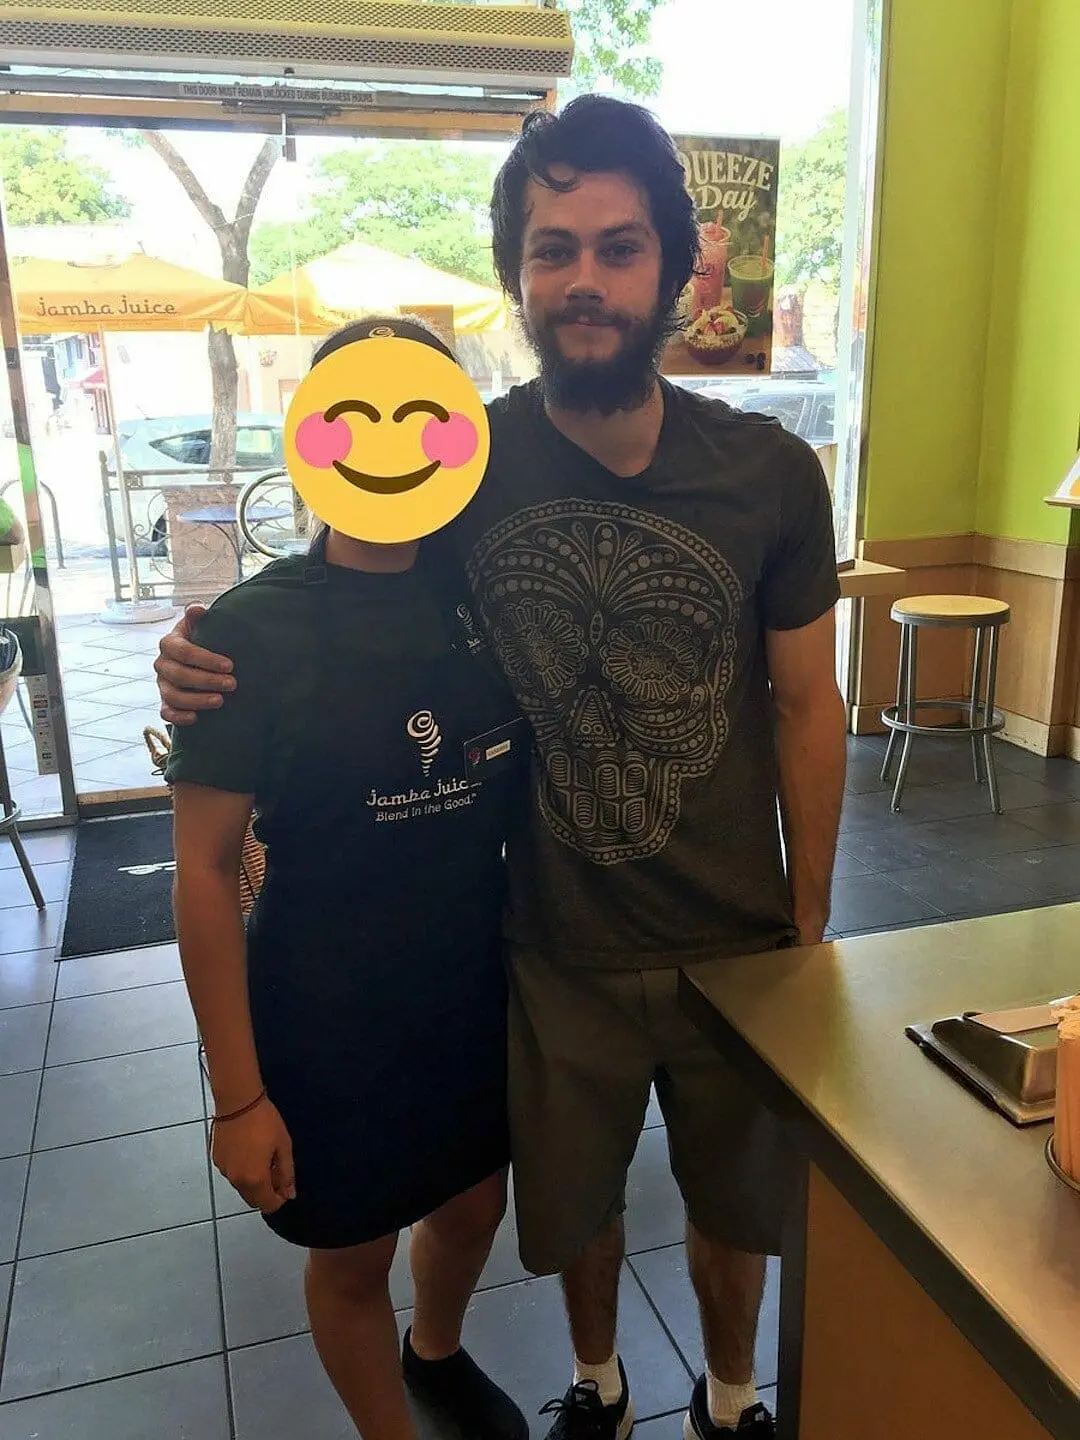 Dylan O'Brien shirt in leaked photo